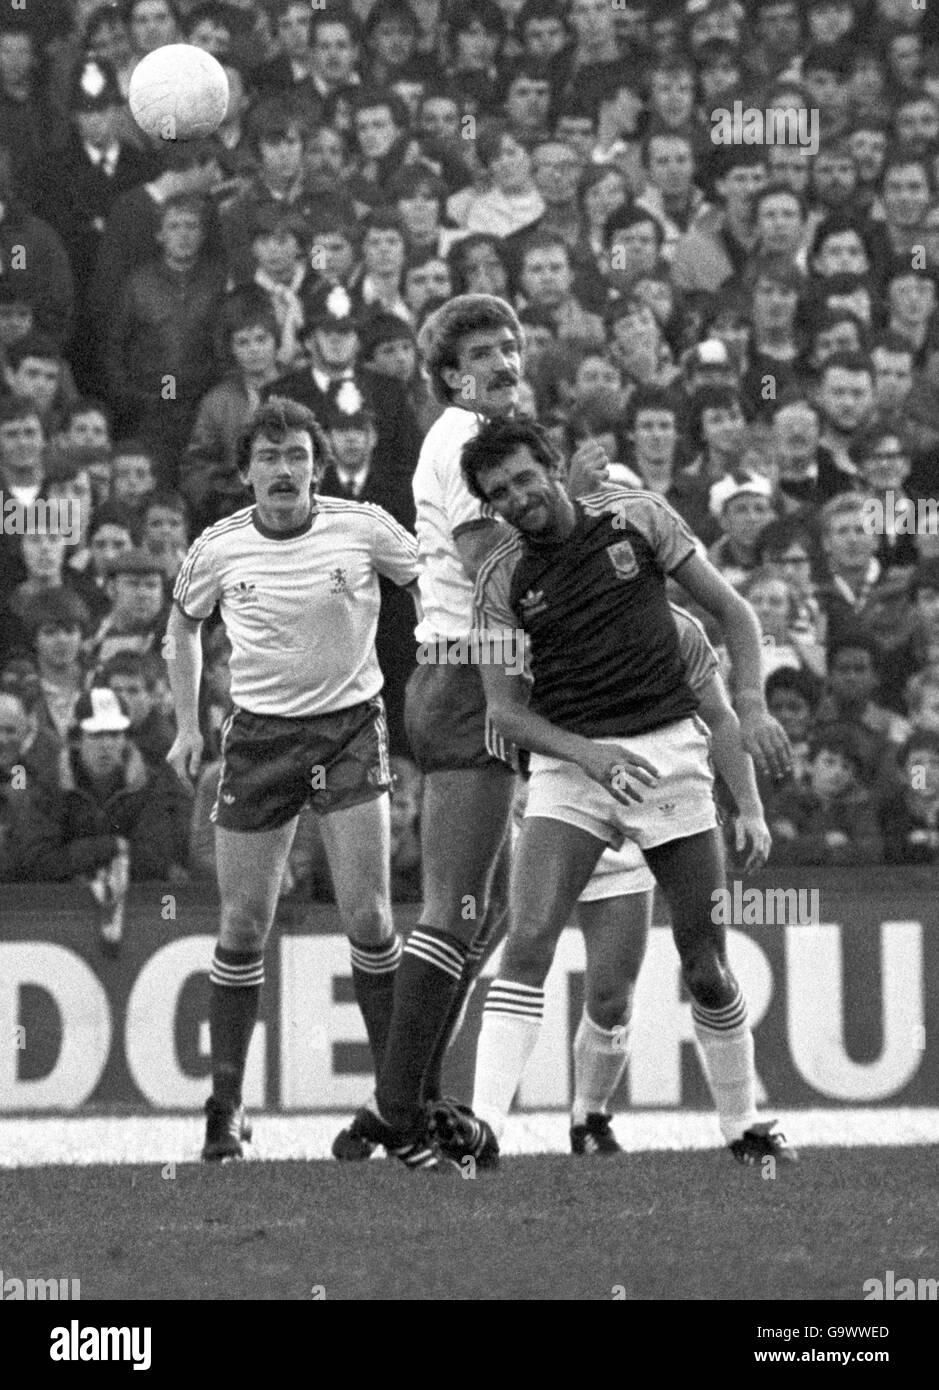 Michael Baxter backed up by Middlesbrough colleague Michael Angus (left) clears from the head of West Ham United striker David Cross (white shorts) during this afternoon's League Division One match at Upton Park Stock Photo